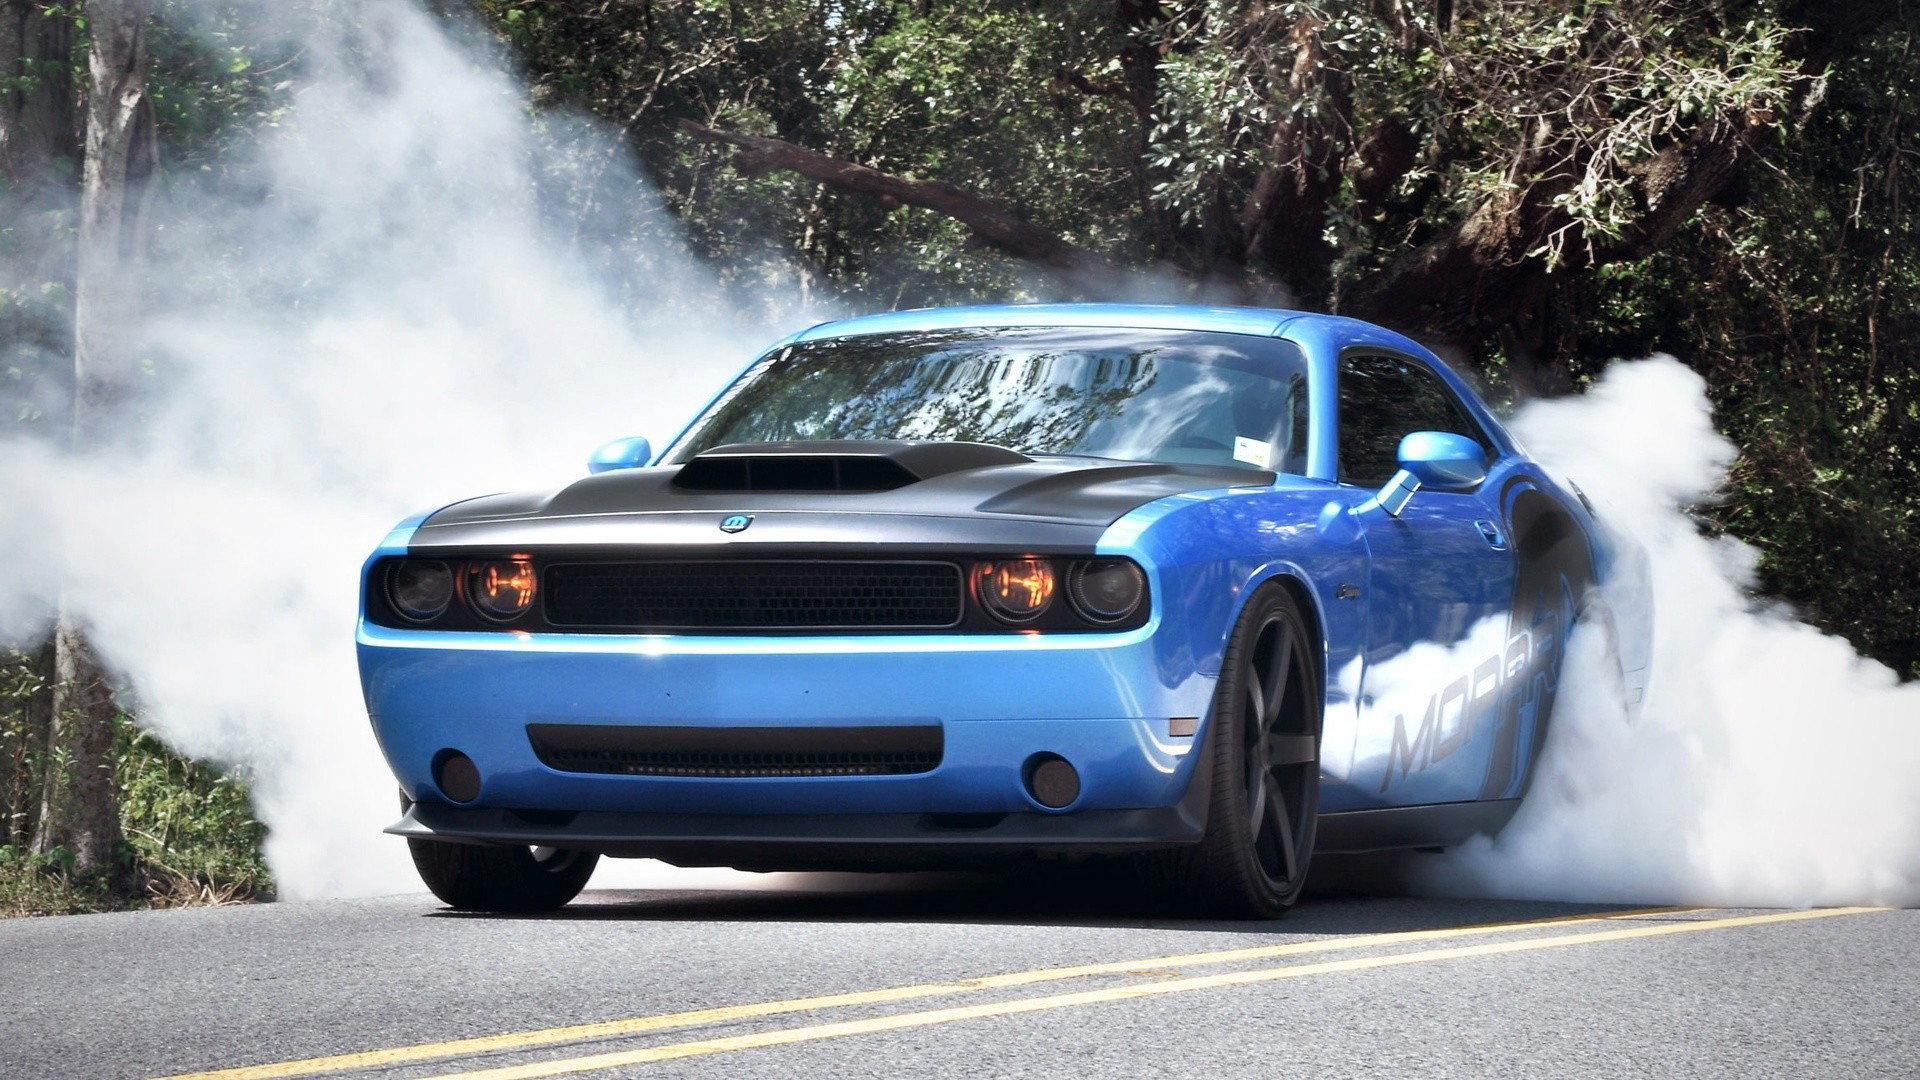 Awesome Dodge Challenger free wallpaper ID:231787 for hd 1080p computer